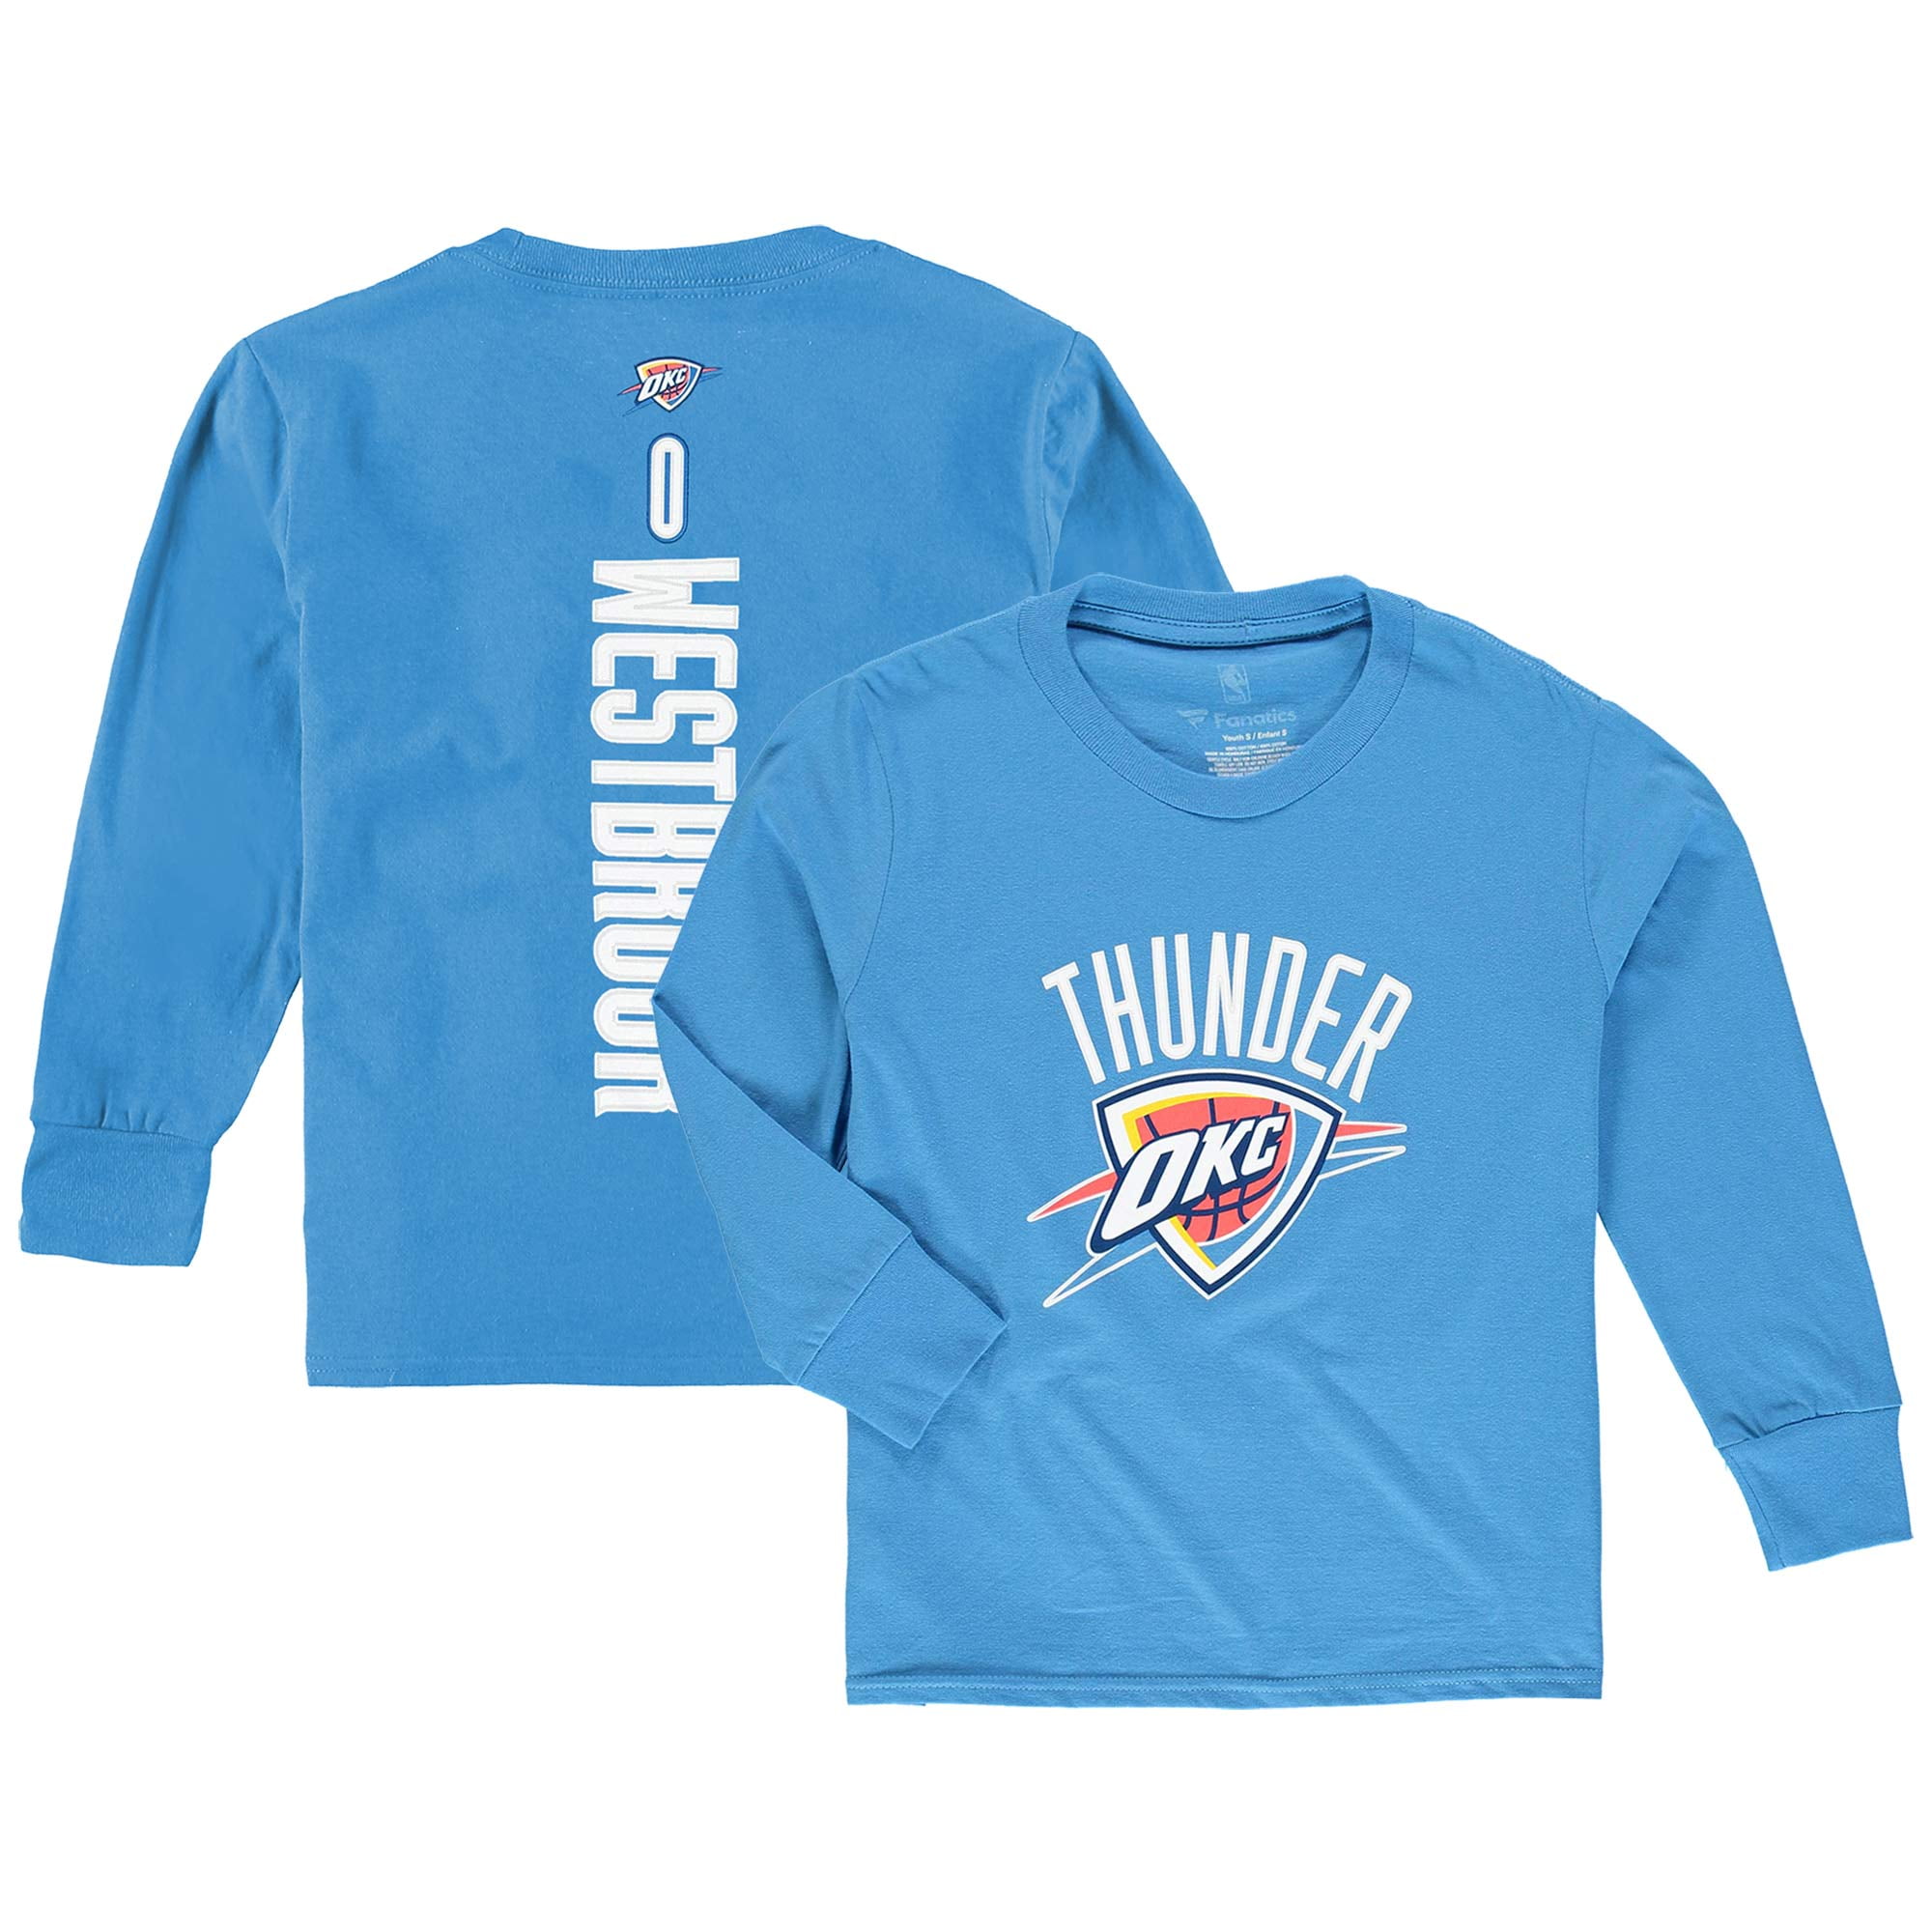 russell westbrook youth home jersey